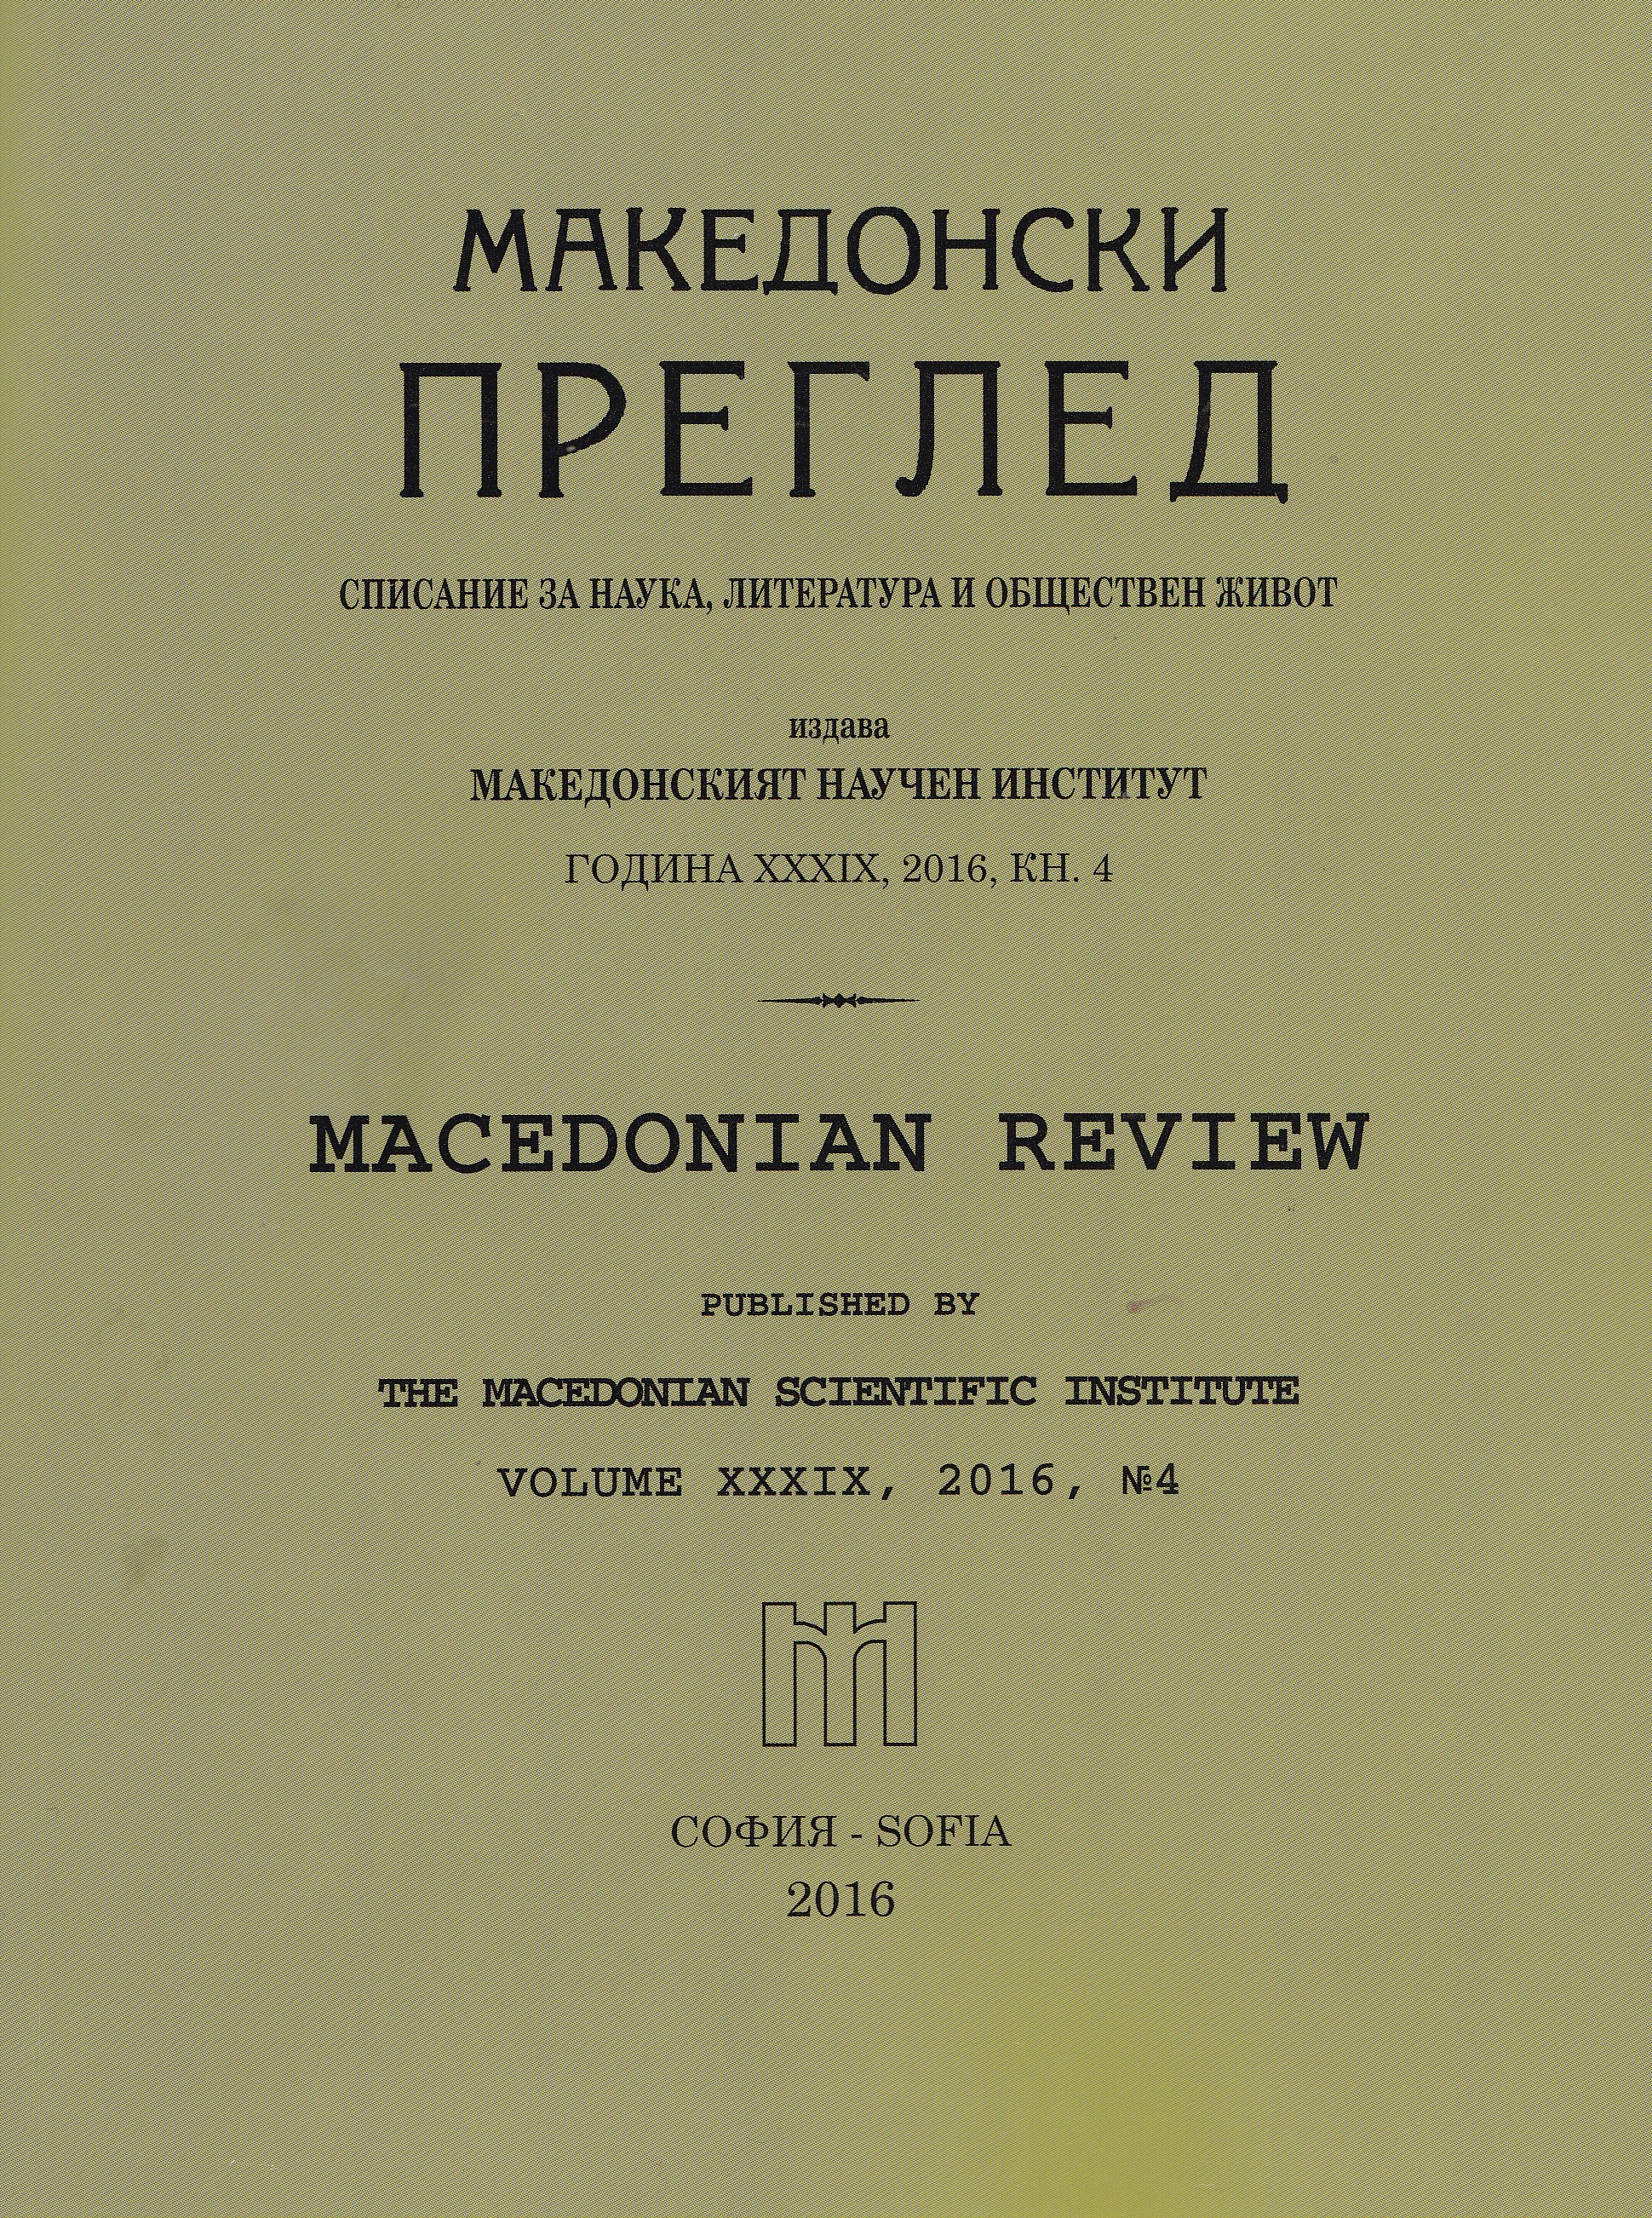 Research and pilgrimage in the Republic of Macedonia, Republic of Albania and Greece (8-11 December 1016) Cover Image